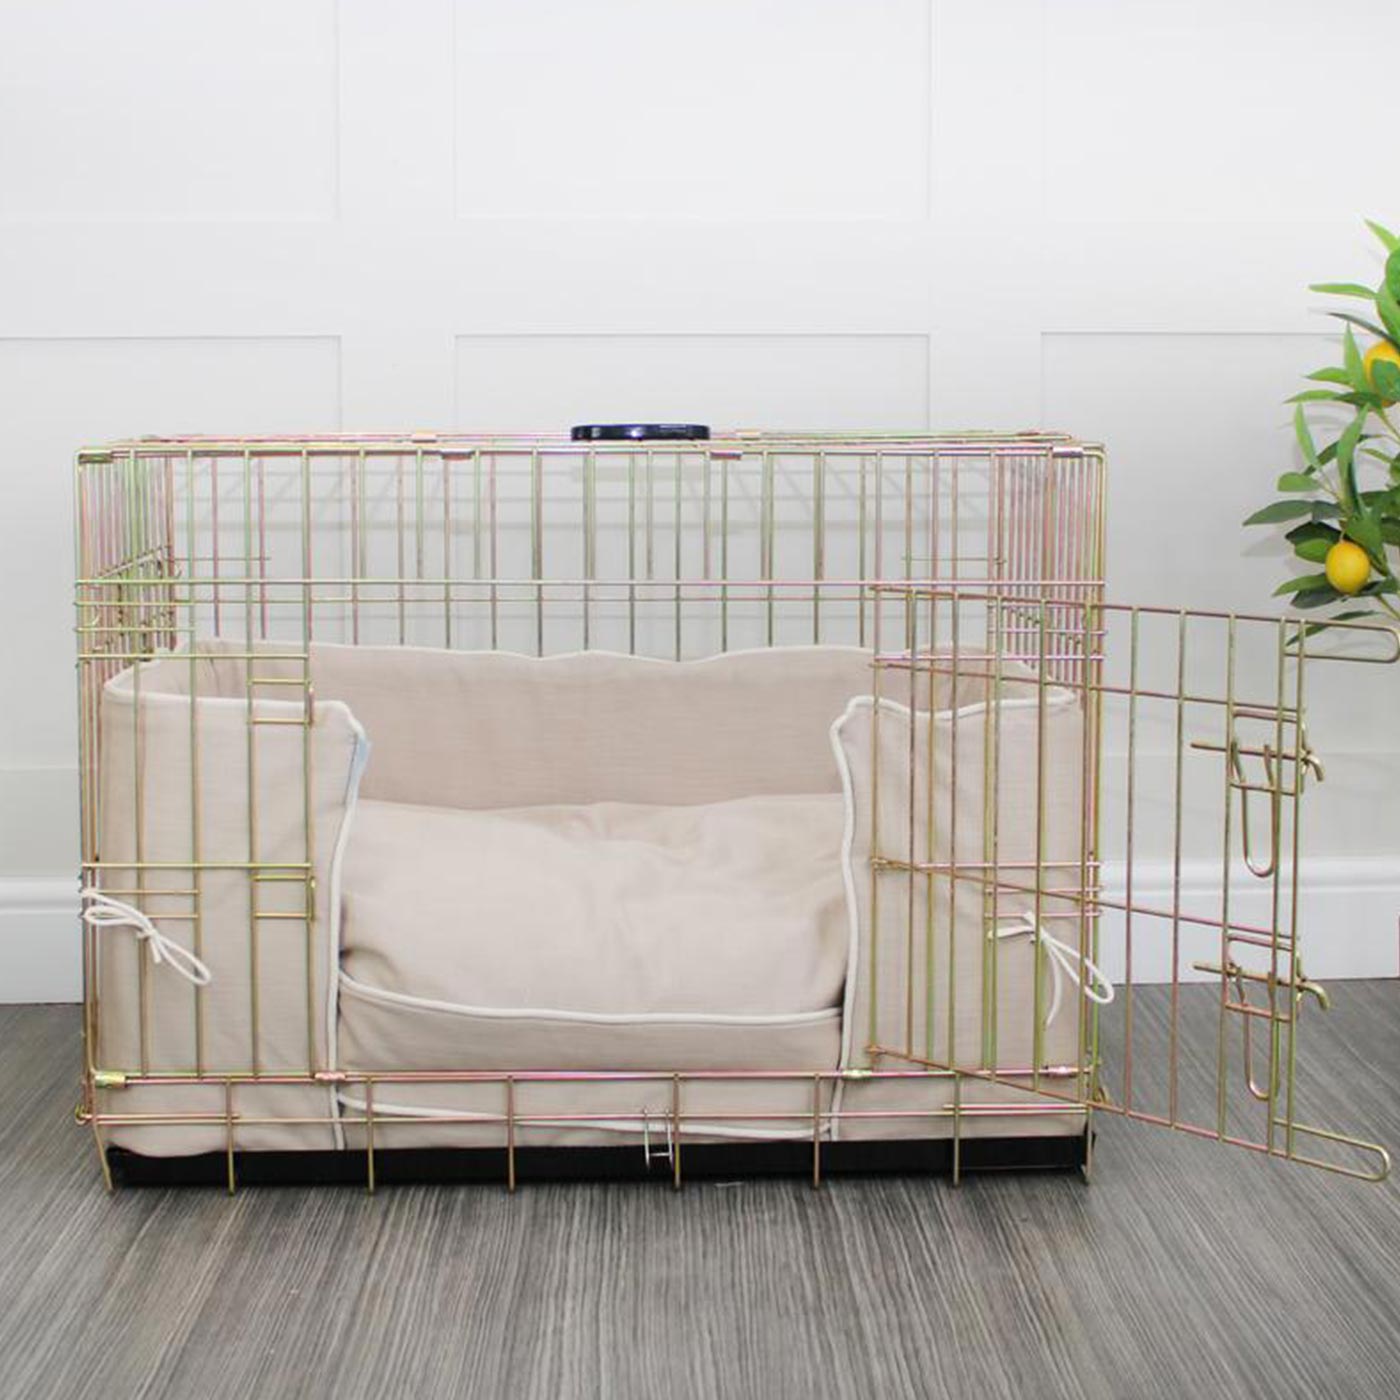 [colour:savanna oatmeal]  Accessorise your dog crate with our stunning bumper covers, choose from our Savanna collection! Made using luxury fabric for the perfect crate accessory to build the ultimate dog den! Available now in 3 colours and sizes at Lords & Labradors